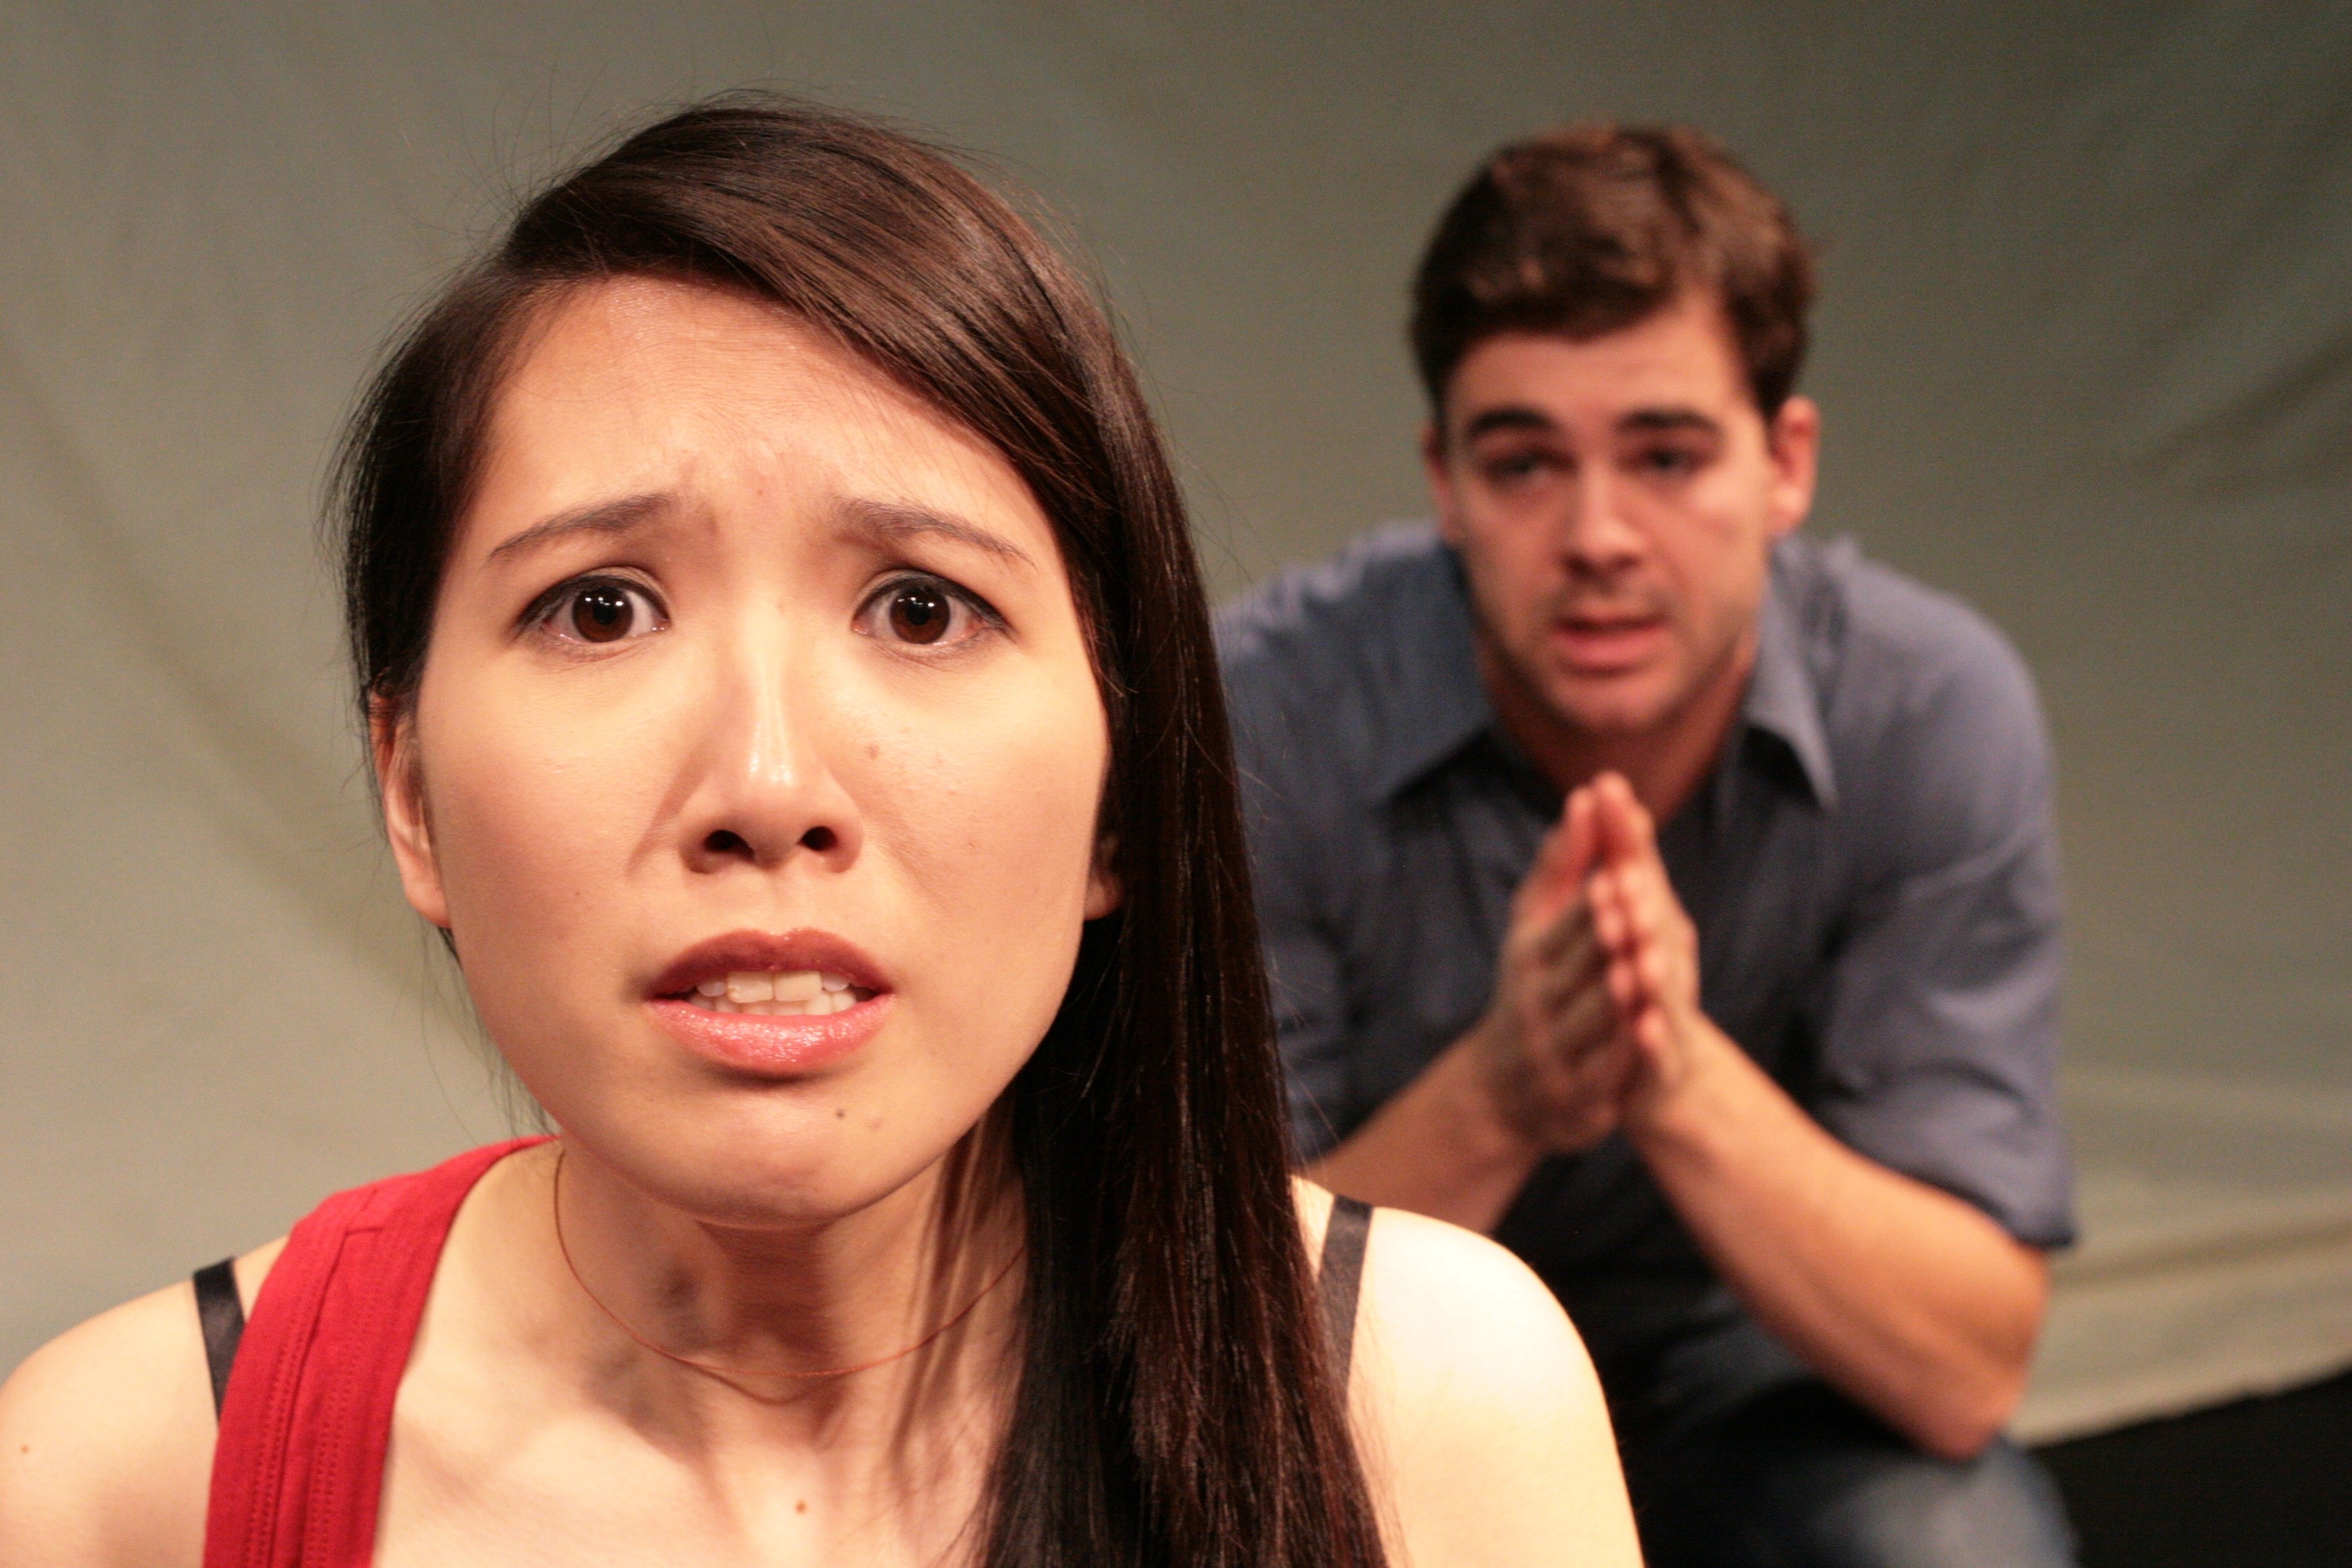 POWERFUL PLAY-- Denise Wong and Aaron Krogman rehearse a scene from She Has A Name